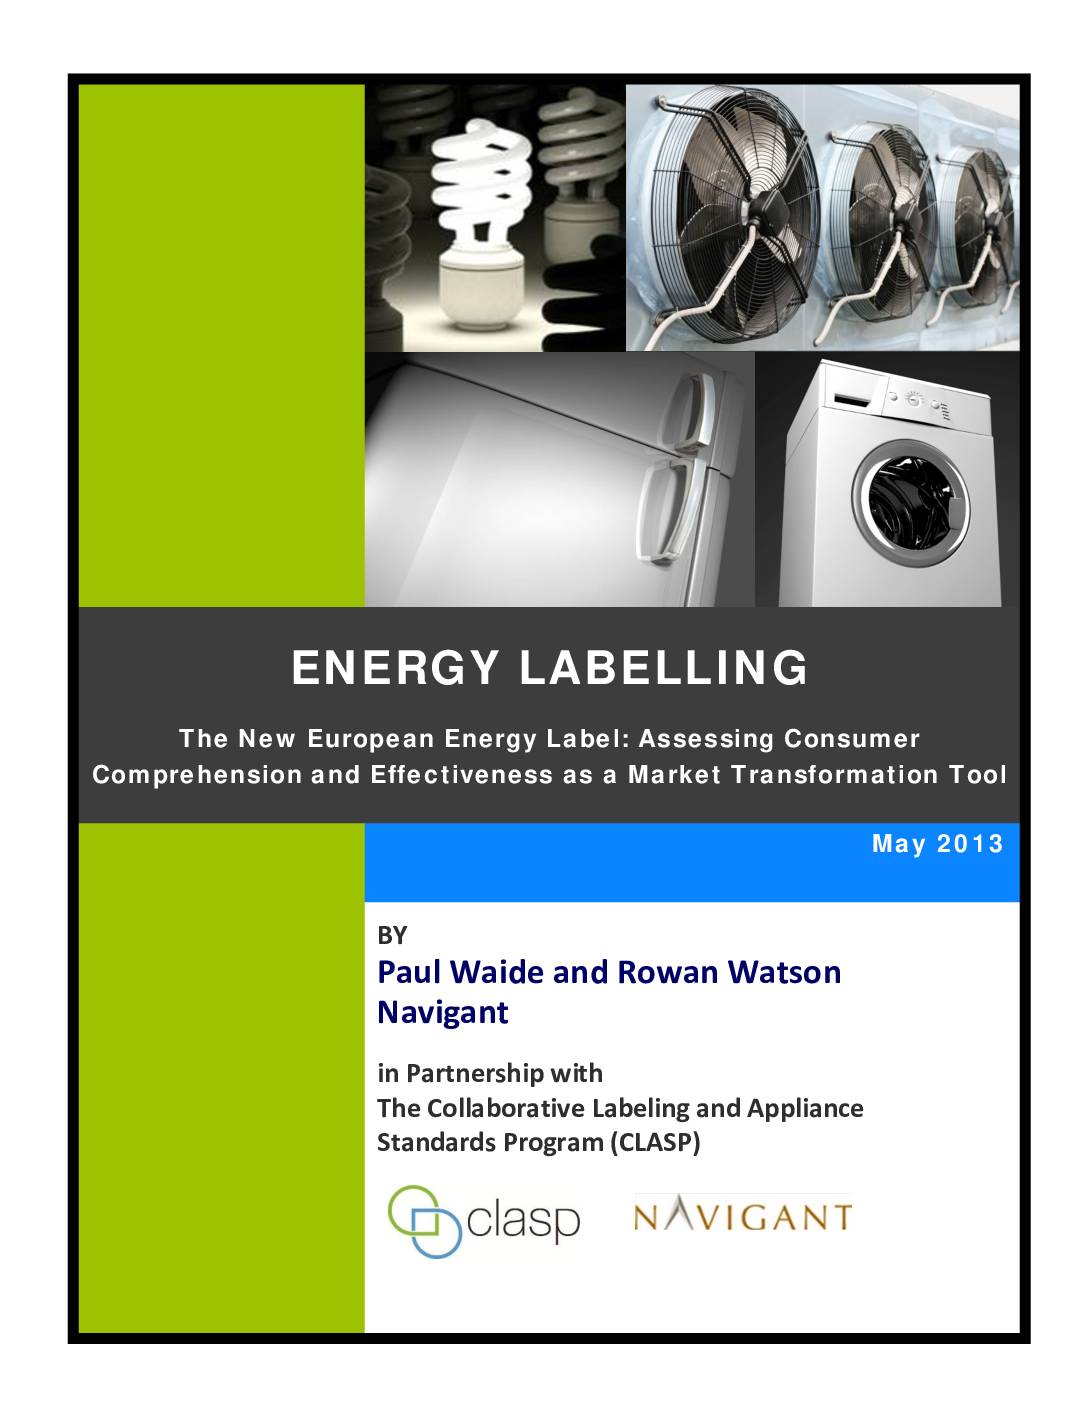 Energy Labelling: The New European Energy Label: Assessing Consumer Comprehension and Effectiveness as a Market Transformation Tool